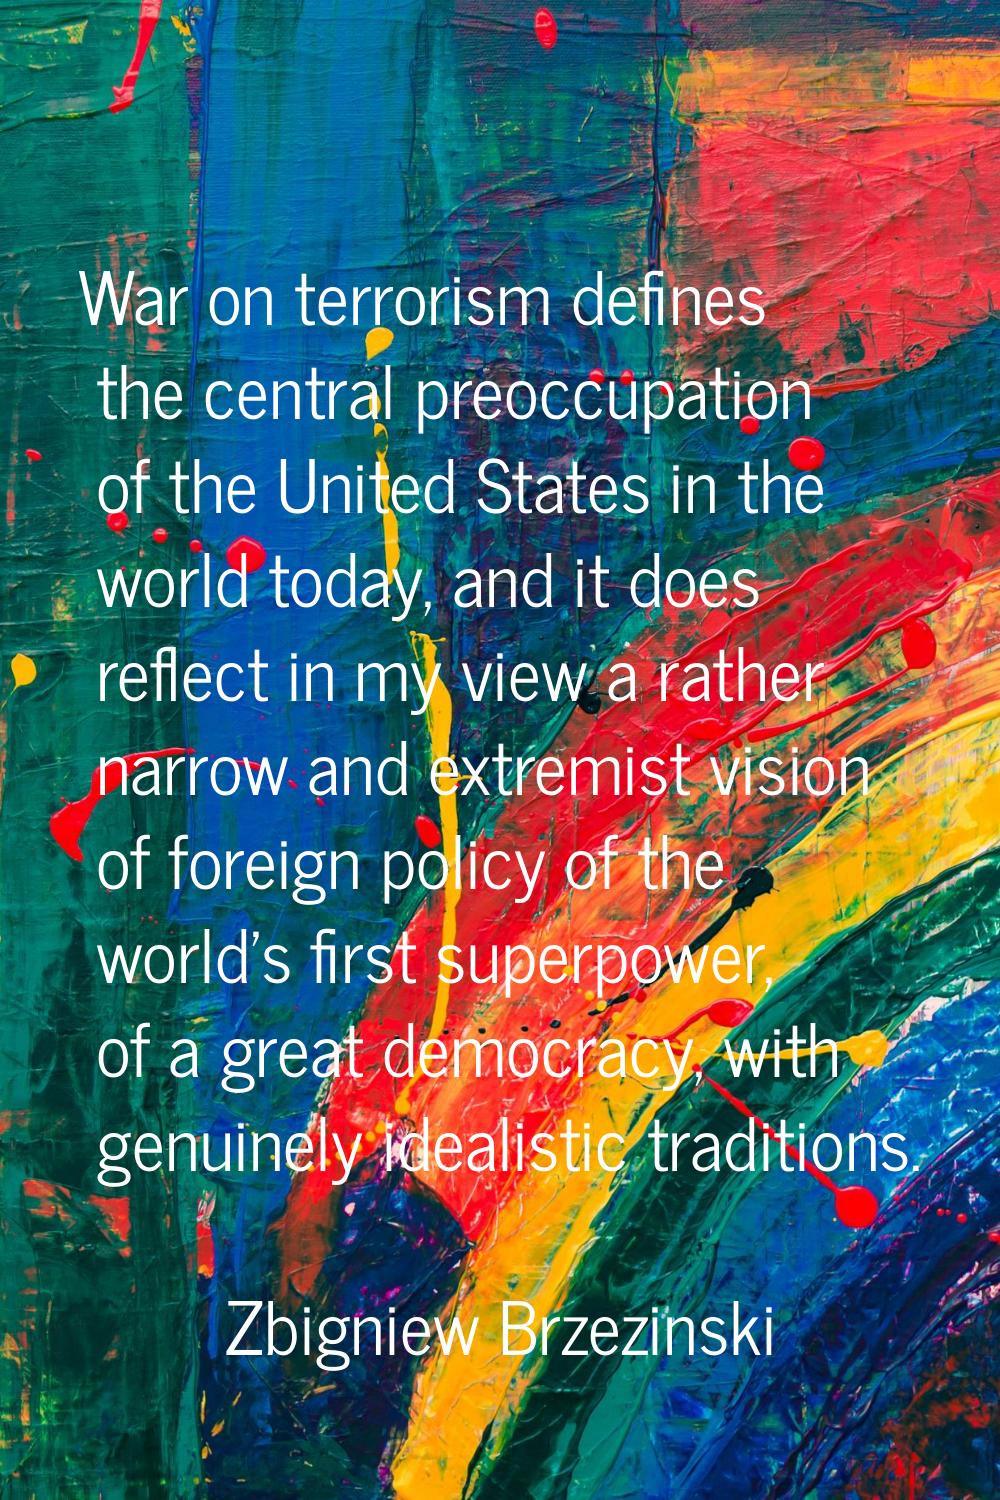 War on terrorism defines the central preoccupation of the United States in the world today, and it 